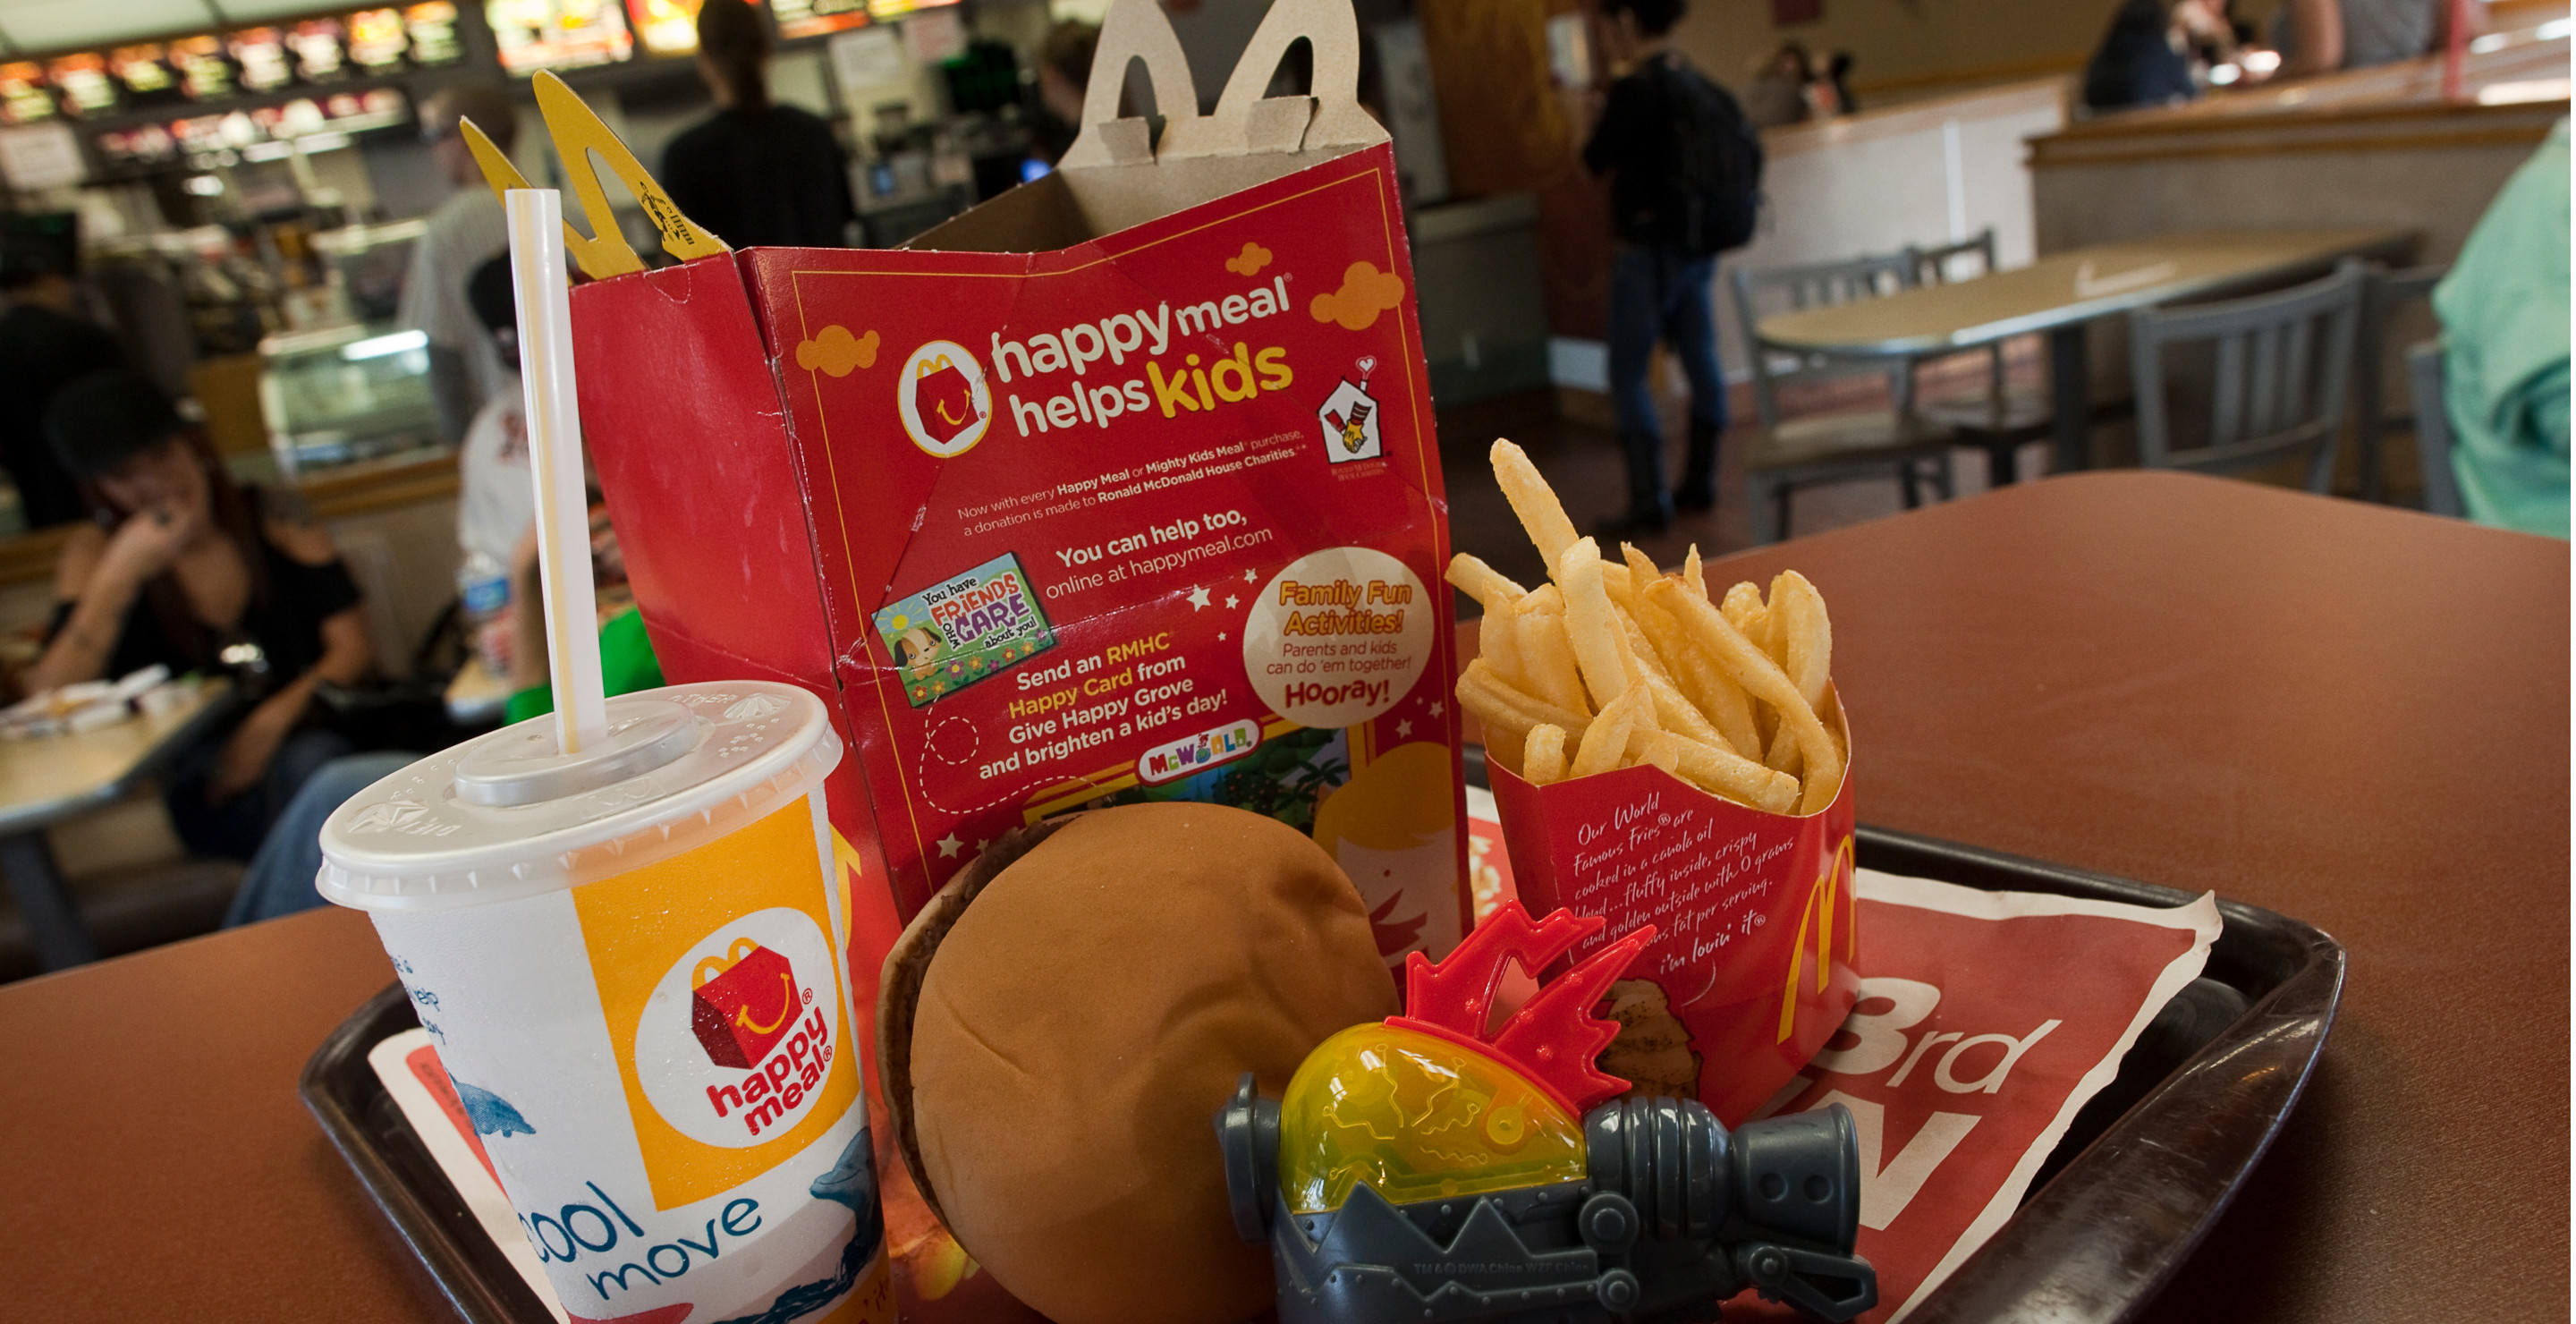 McDonald's Just Removed It's Happy Meal Smile, And Customers Aren't Happy